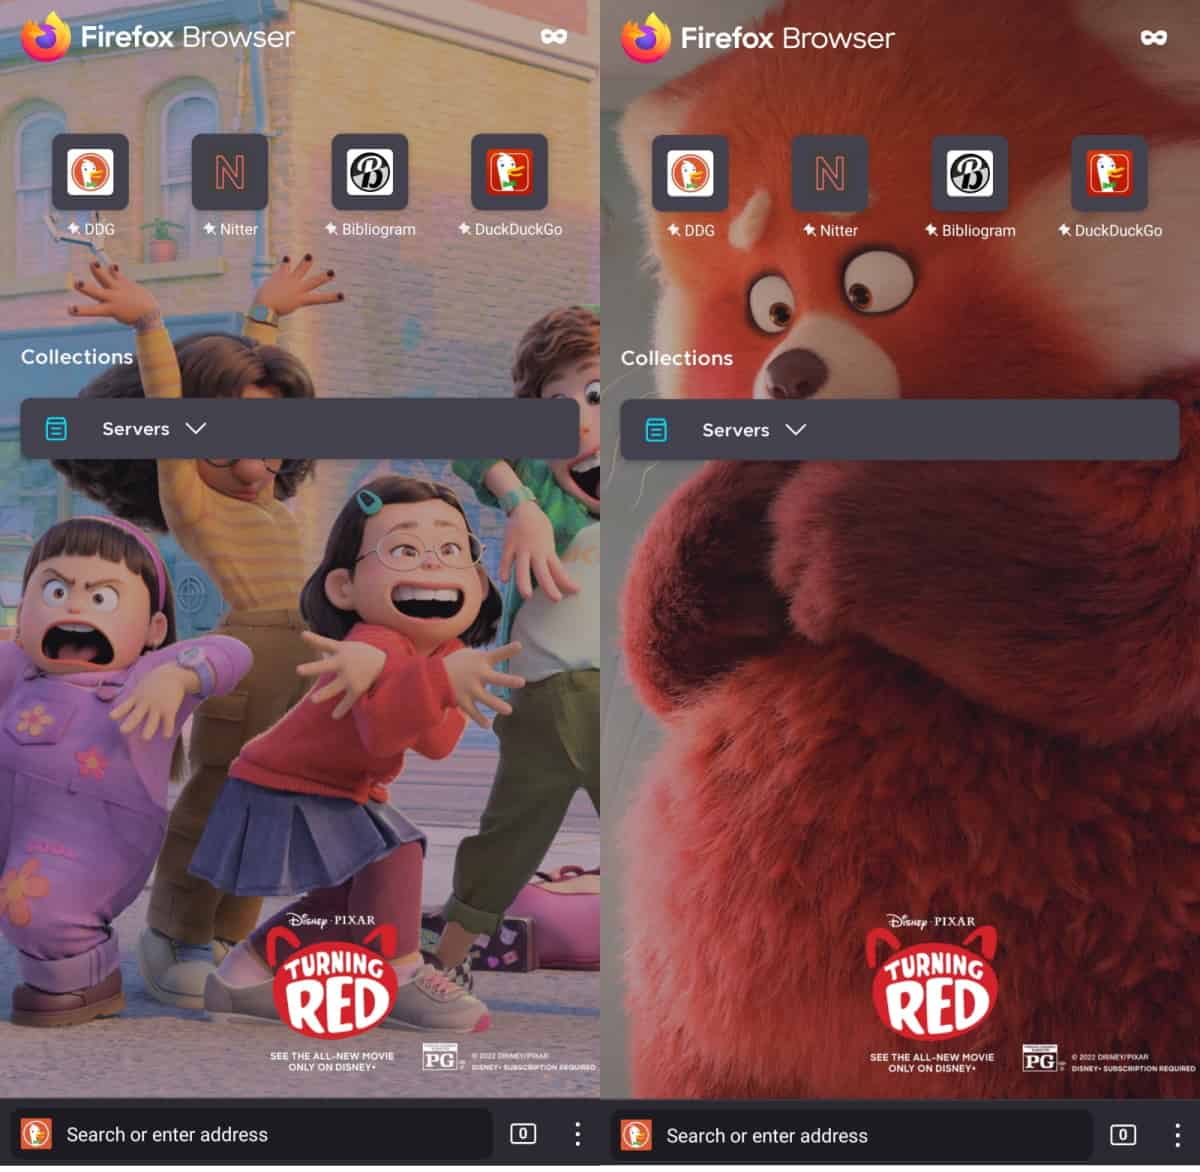 Is Mozilla's mobile OS good for games? See for yourself - CNET